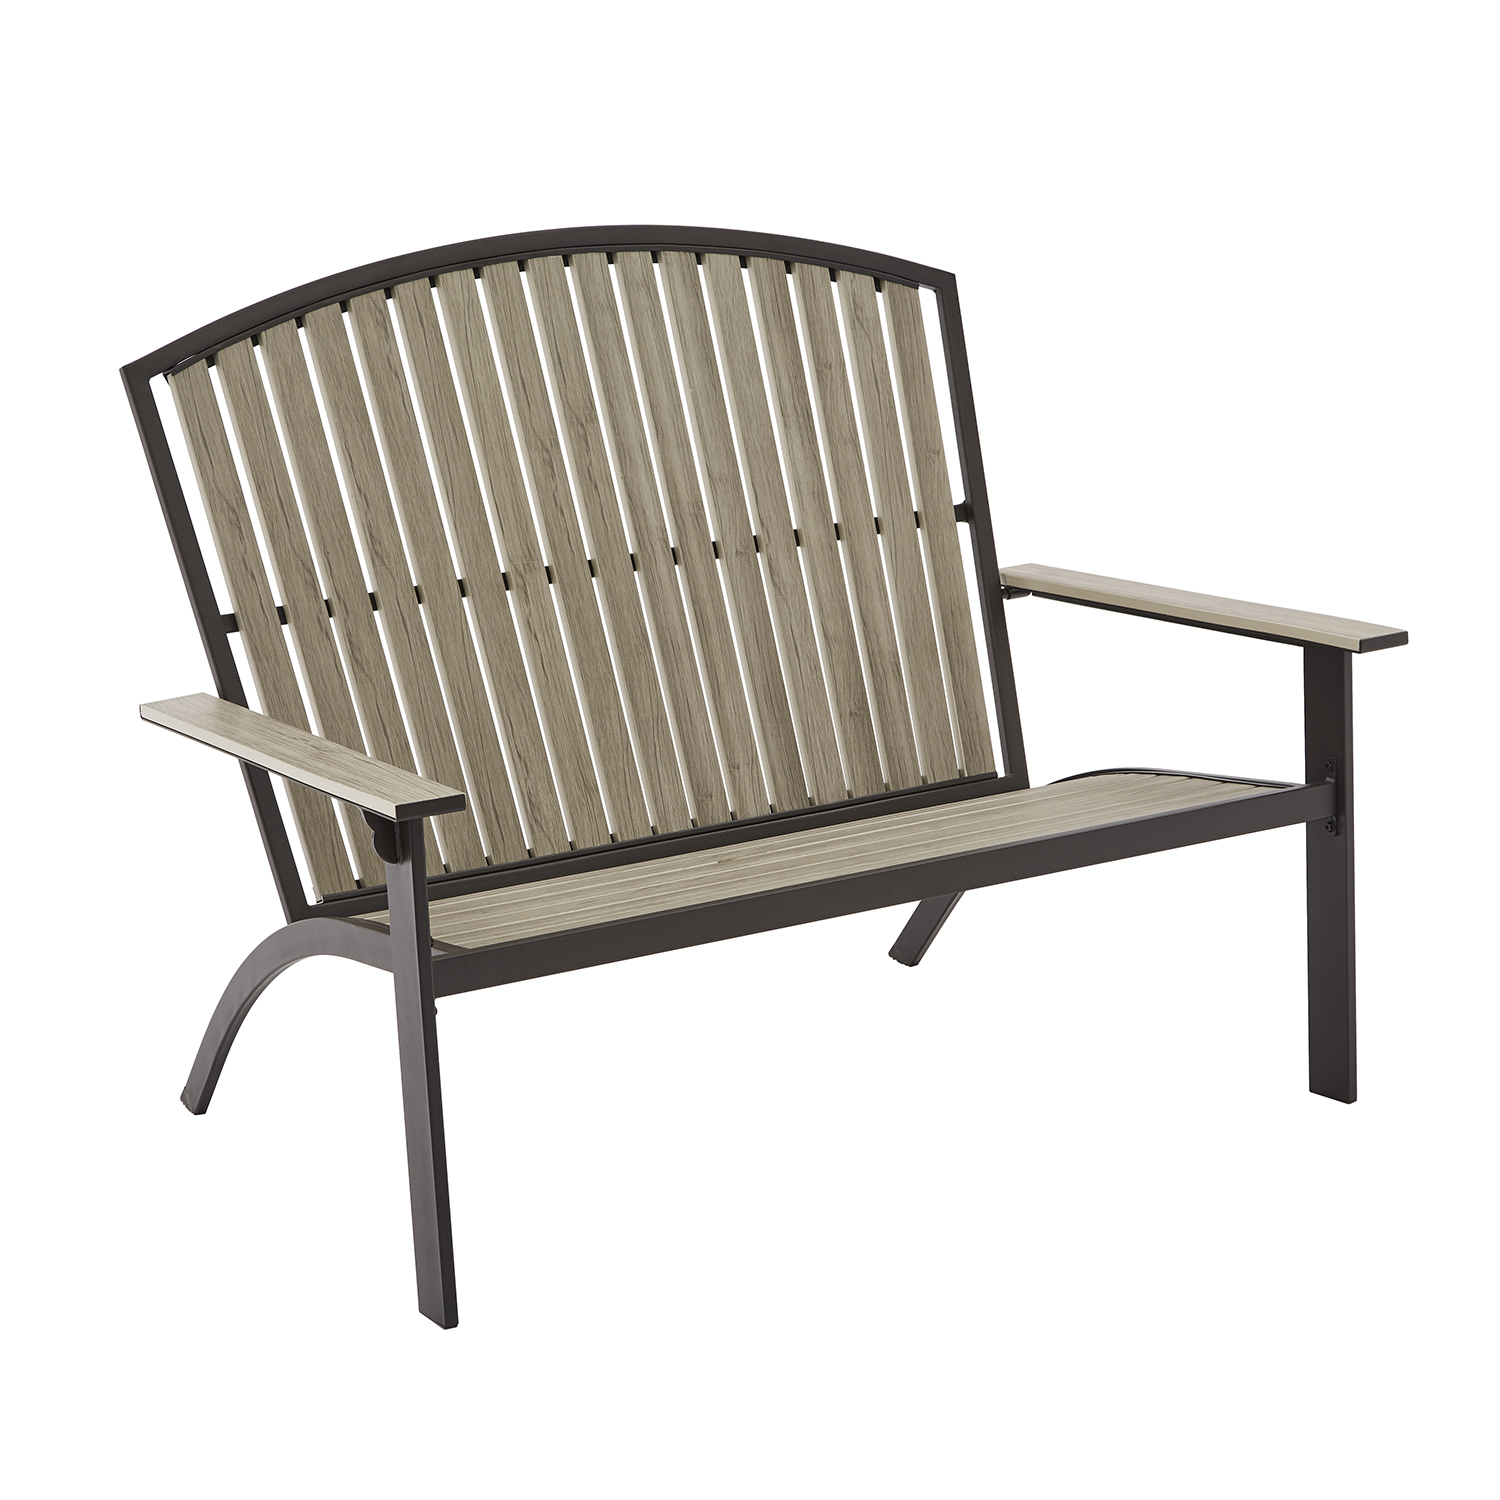 Mainstays Springview Hills Outdoor Durable Resin Bench - Gray - image 3 of 5